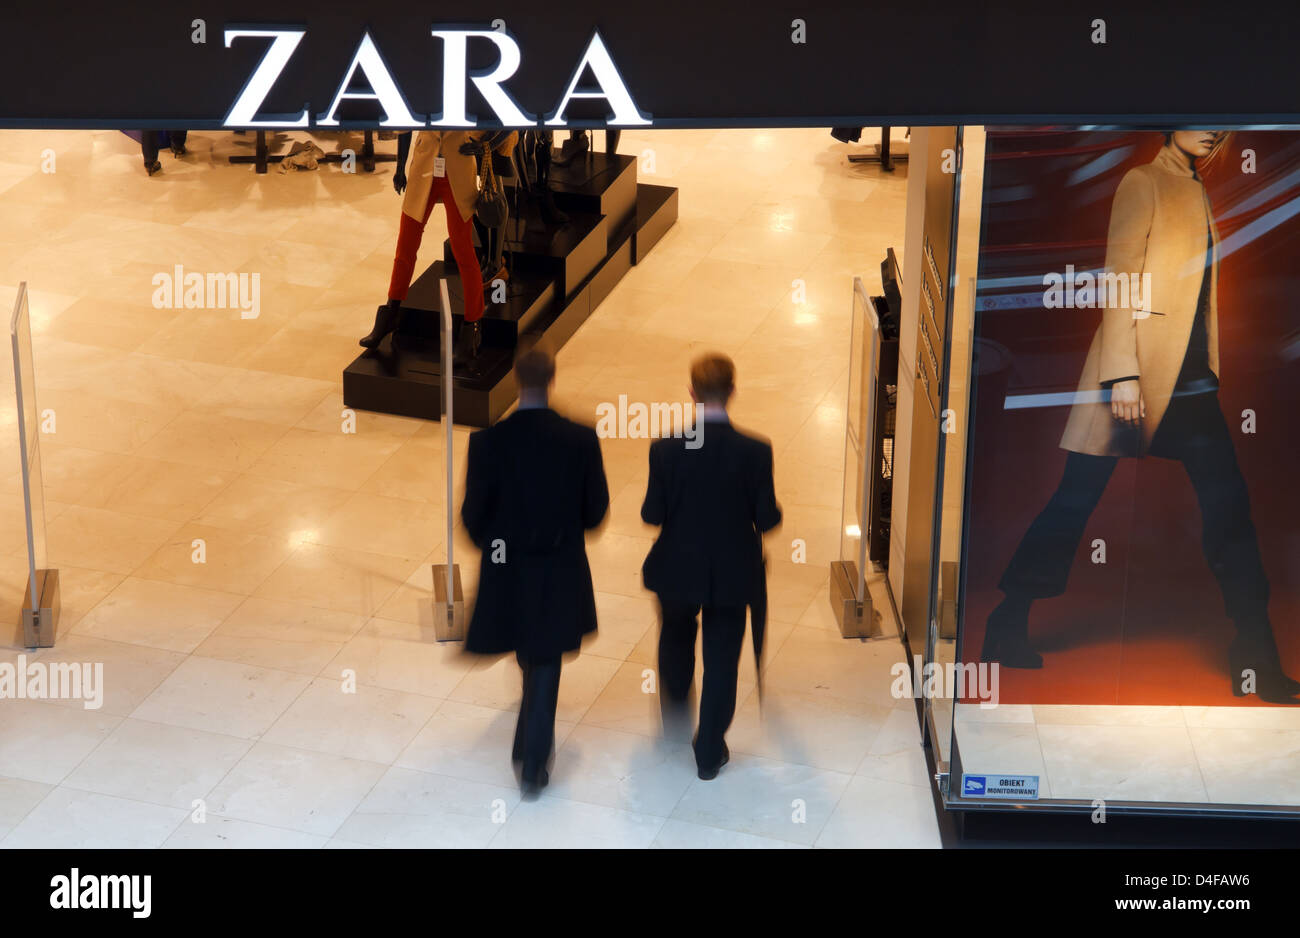 Warsaw, Poland, Zara shopping complex in Golden Terraces (Zlote Tarasy), the largest shopping center in Poland Stock Photo